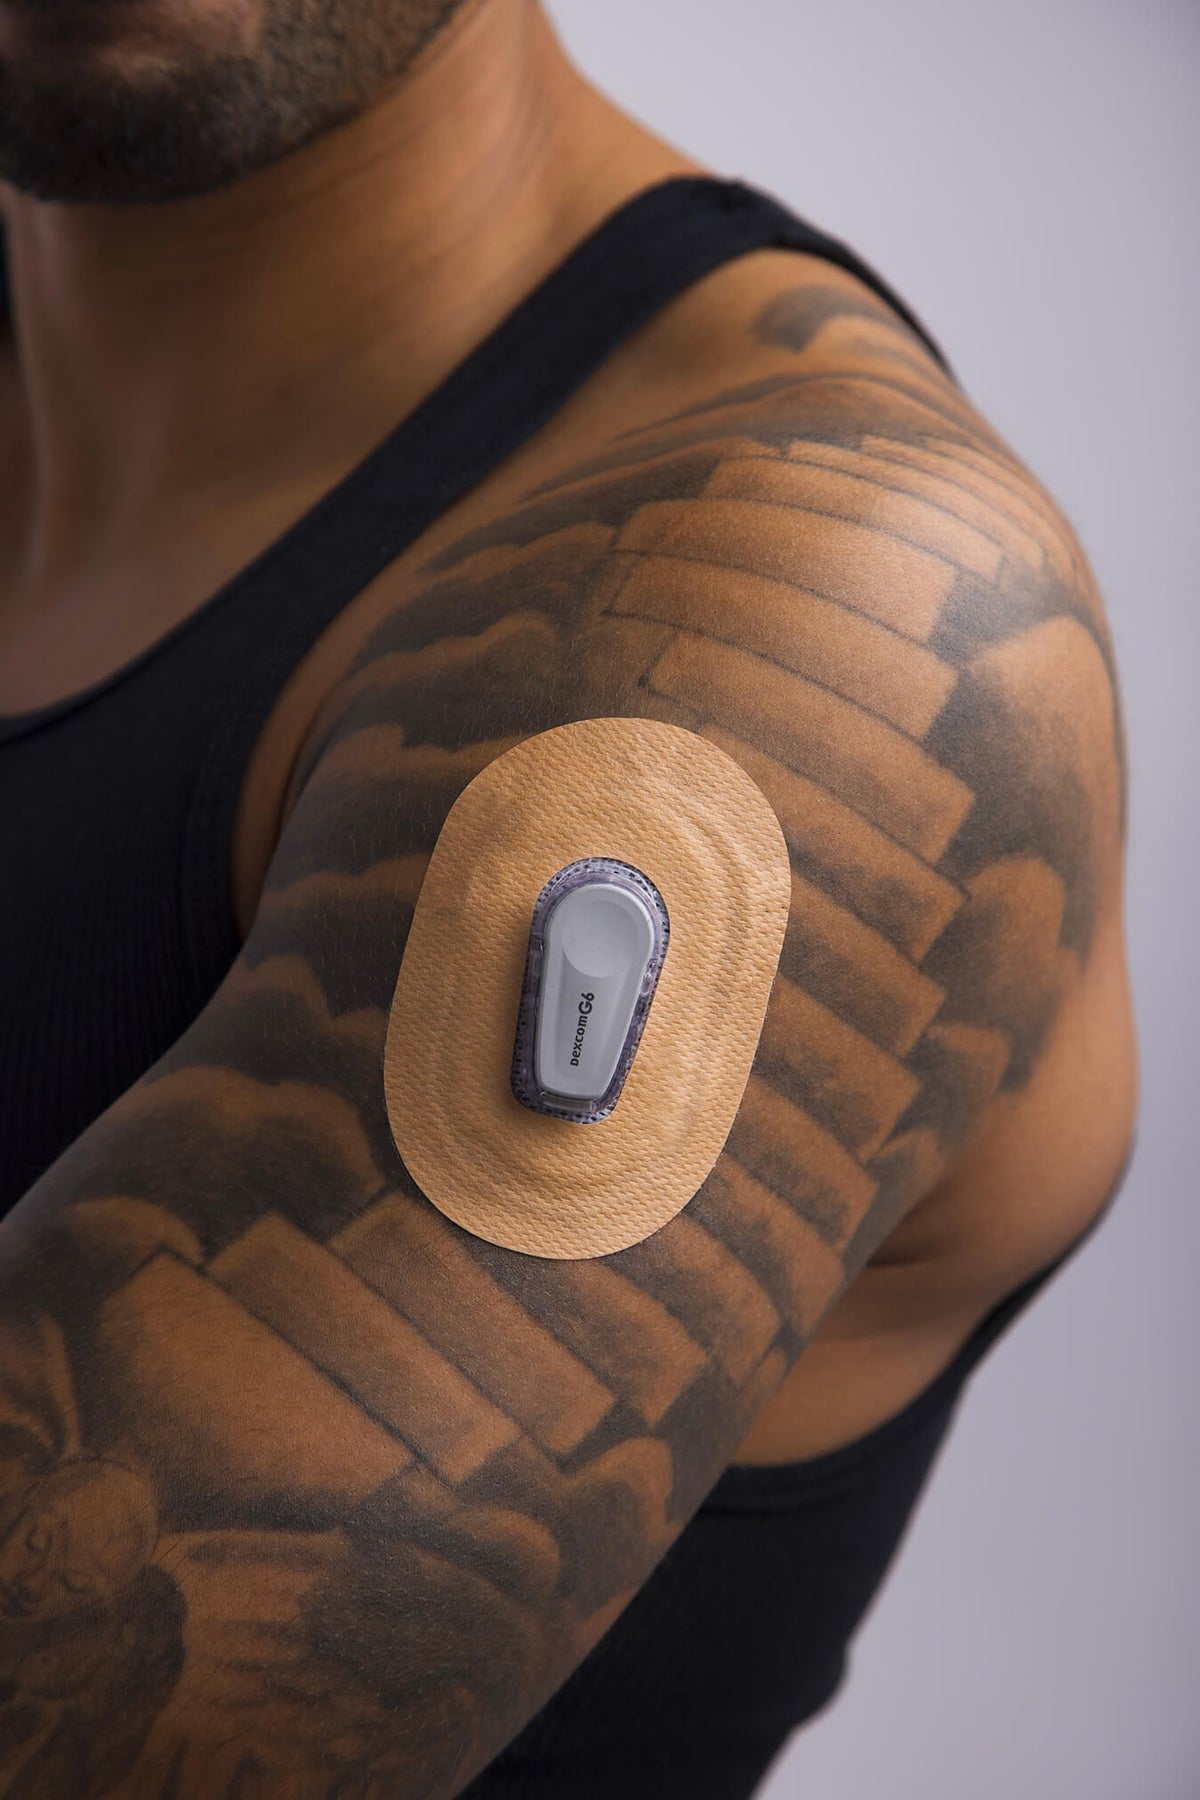 Skin Grip Original-Dexcom G6 Patches [ In Just $27 ] Free shipping